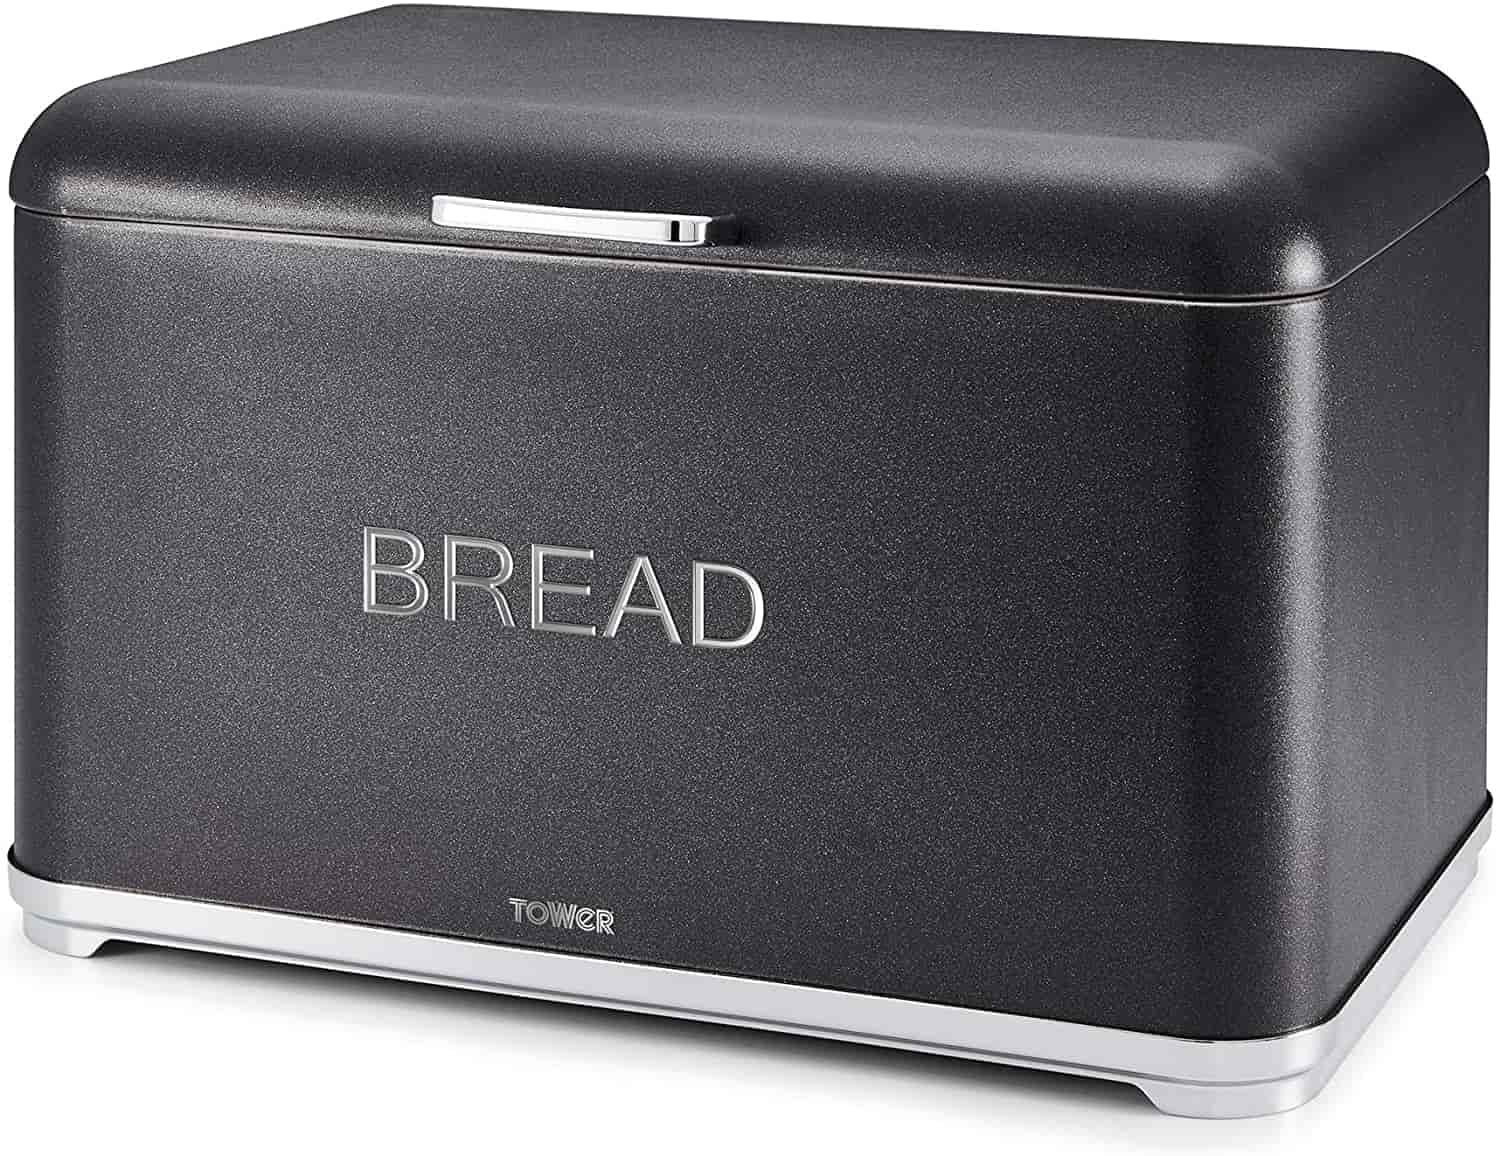 Tower Glitz Kitchen Bread Bin Coated Steel with Chrome Accents Black